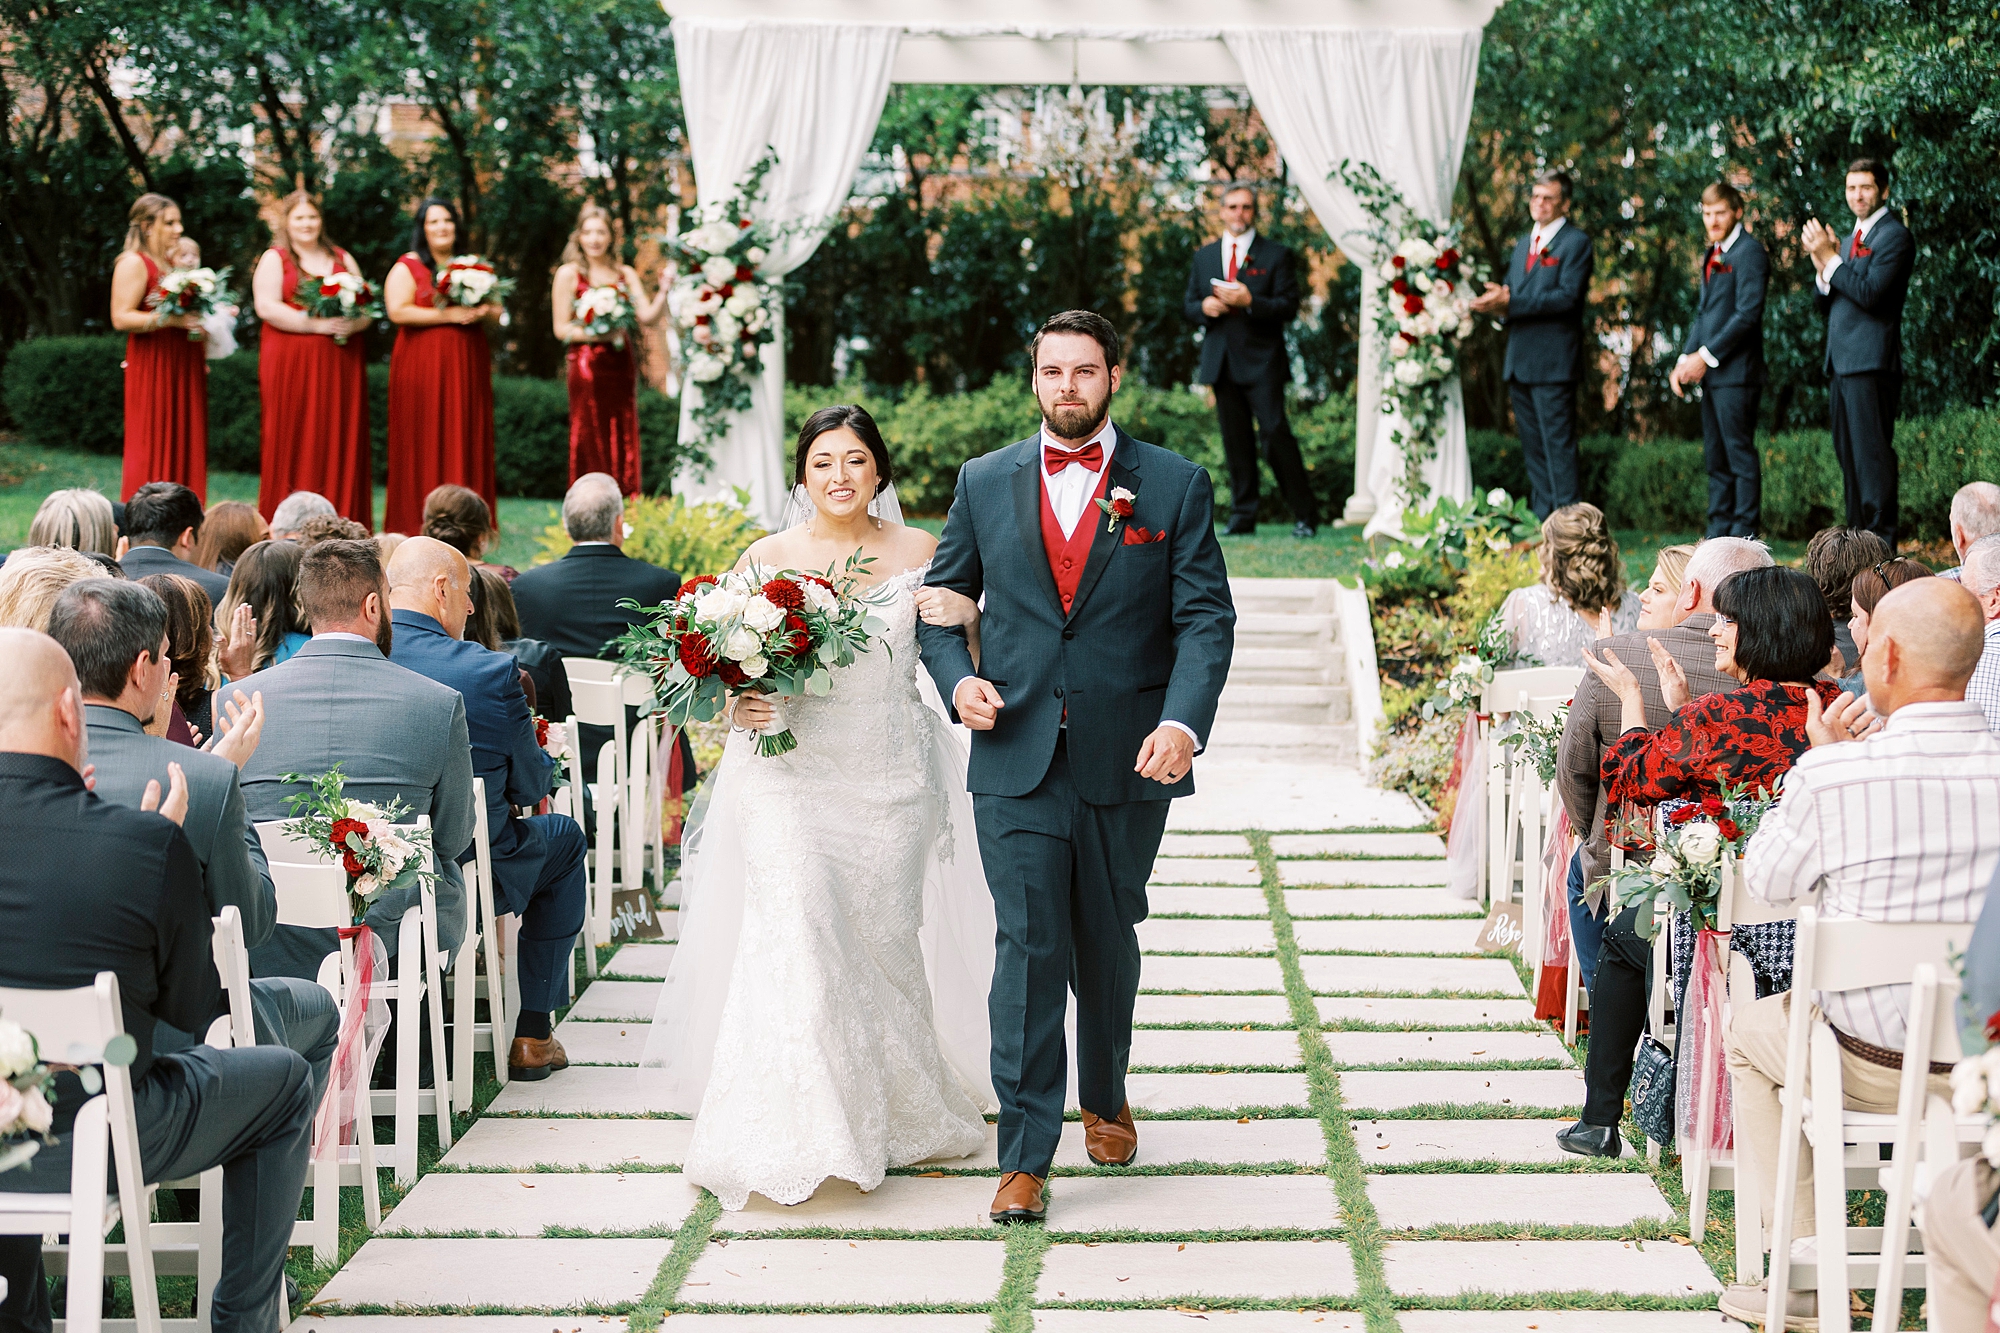 bride and groom walk up aisle after outdoor wedding ceremony at Separk Mansion